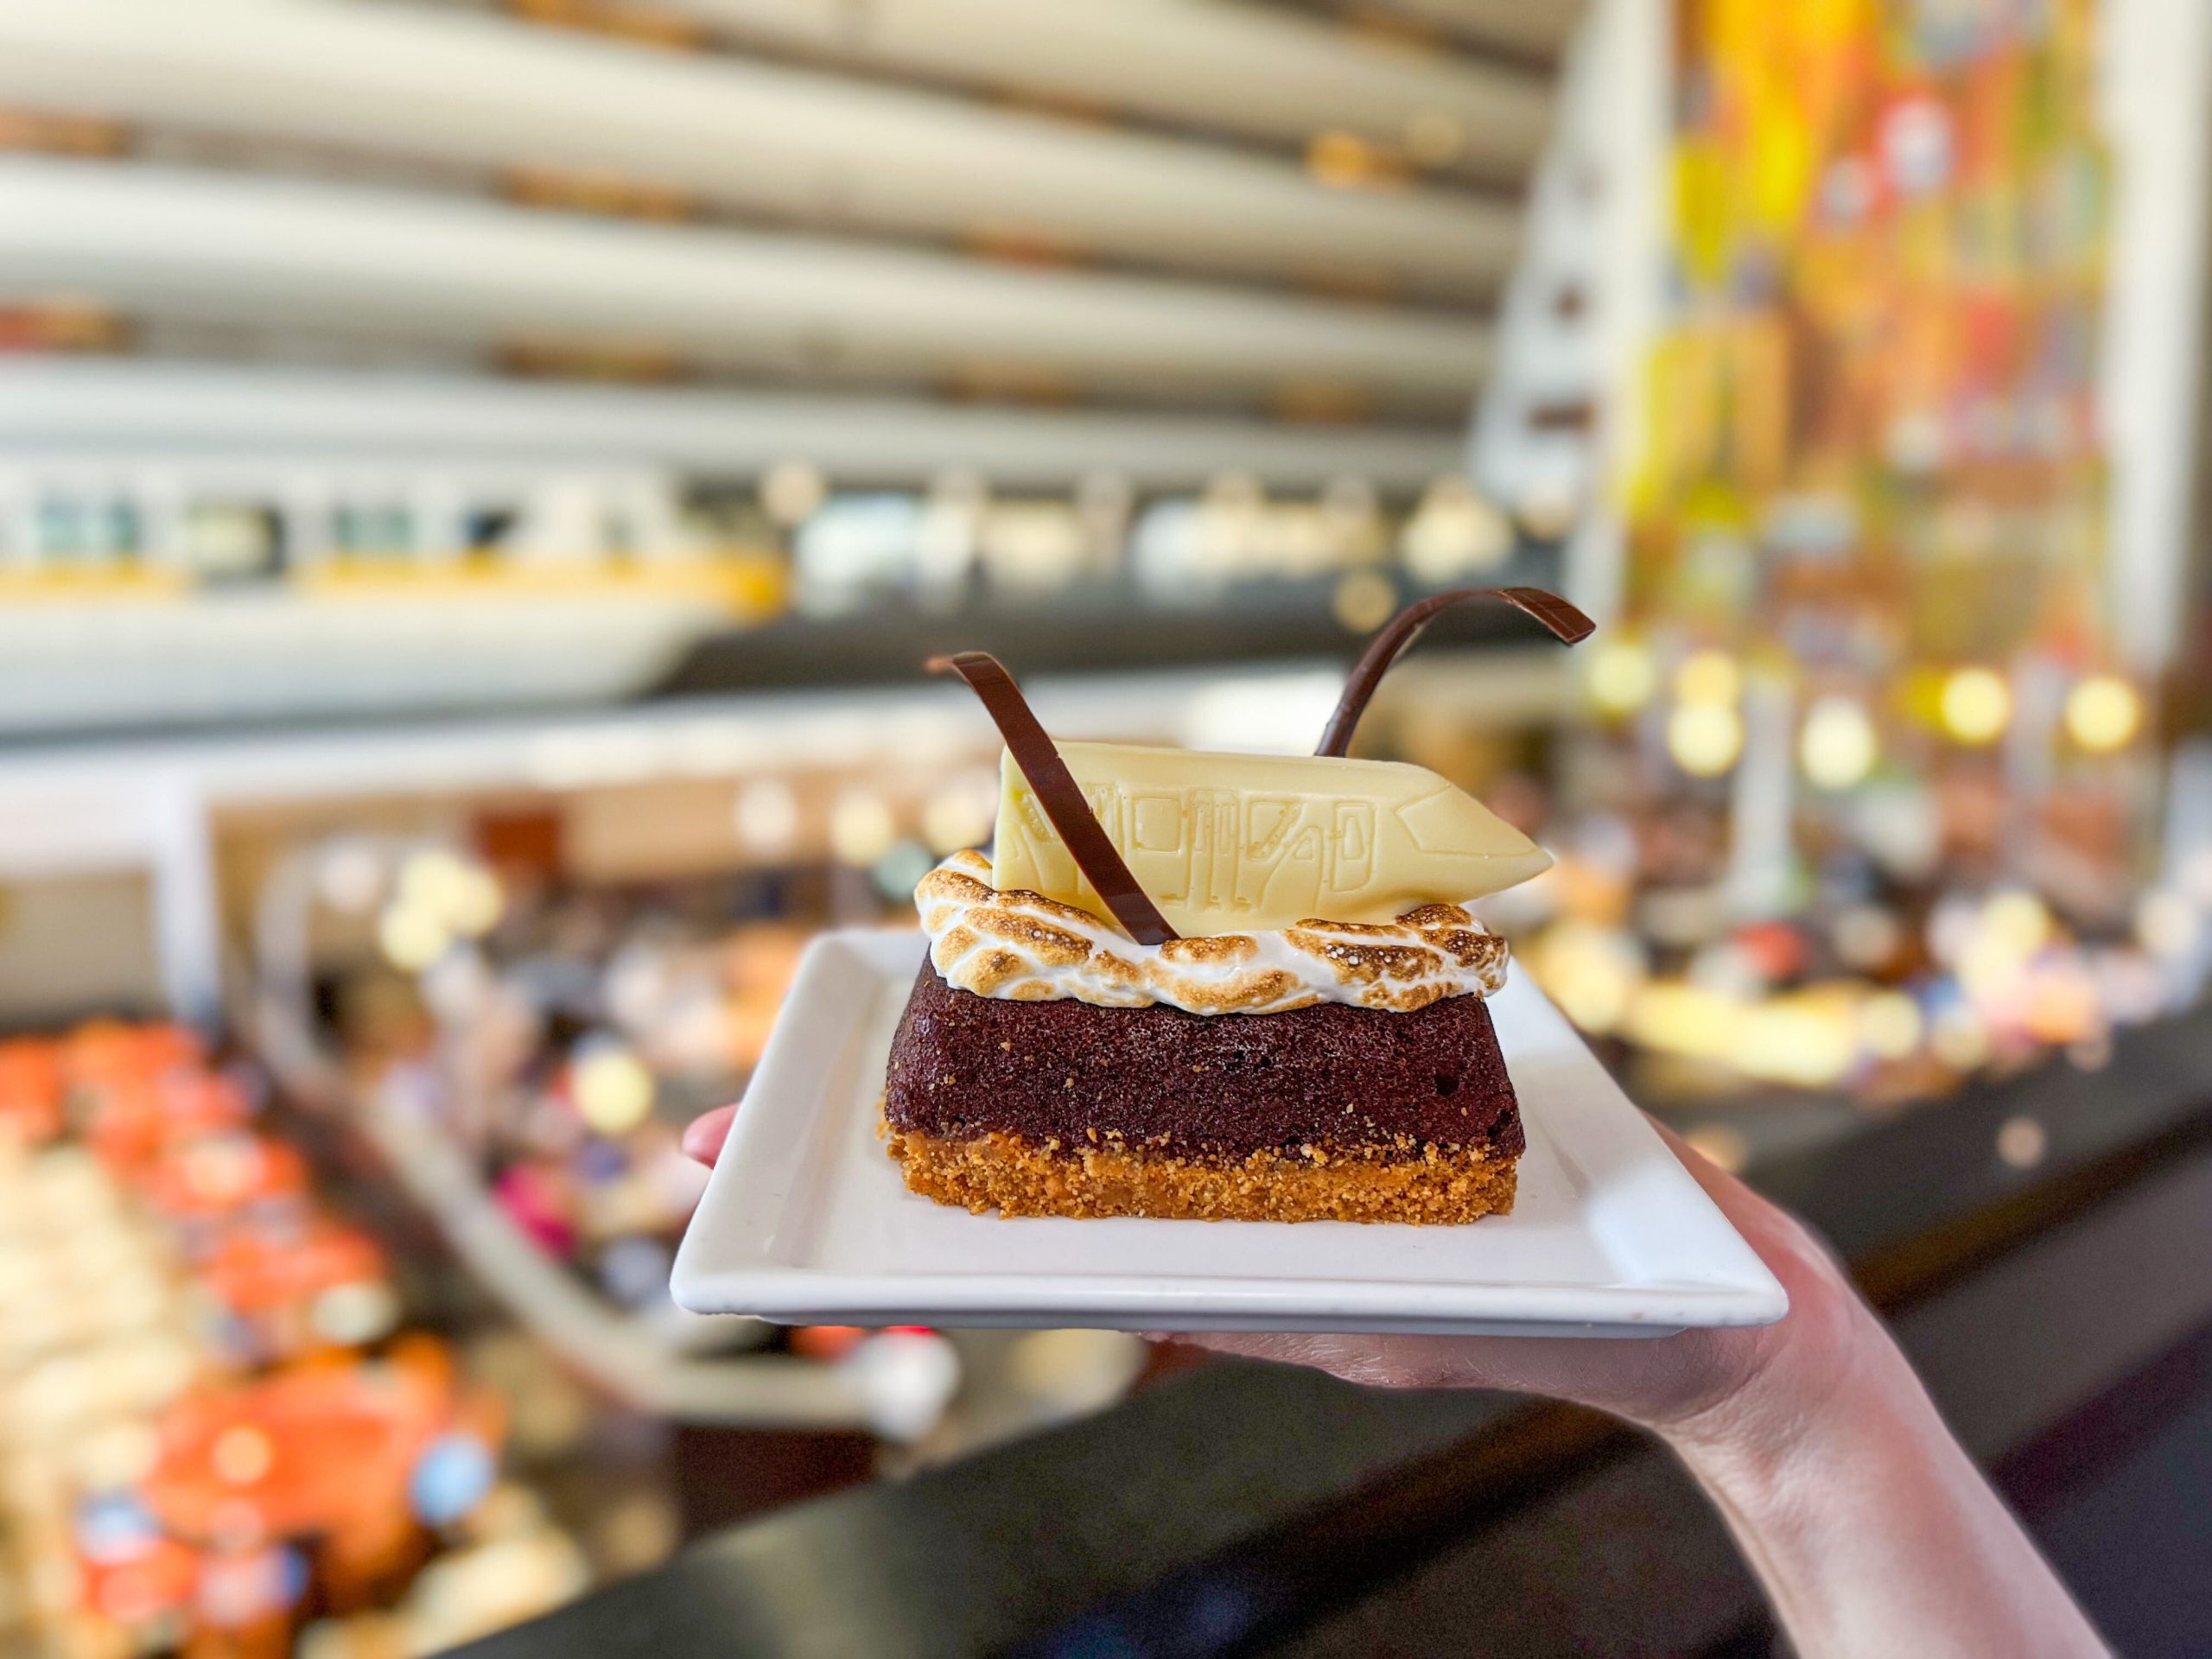 2023 Wdw Contempo Cafe Monorail Smore Brownie Scaled 